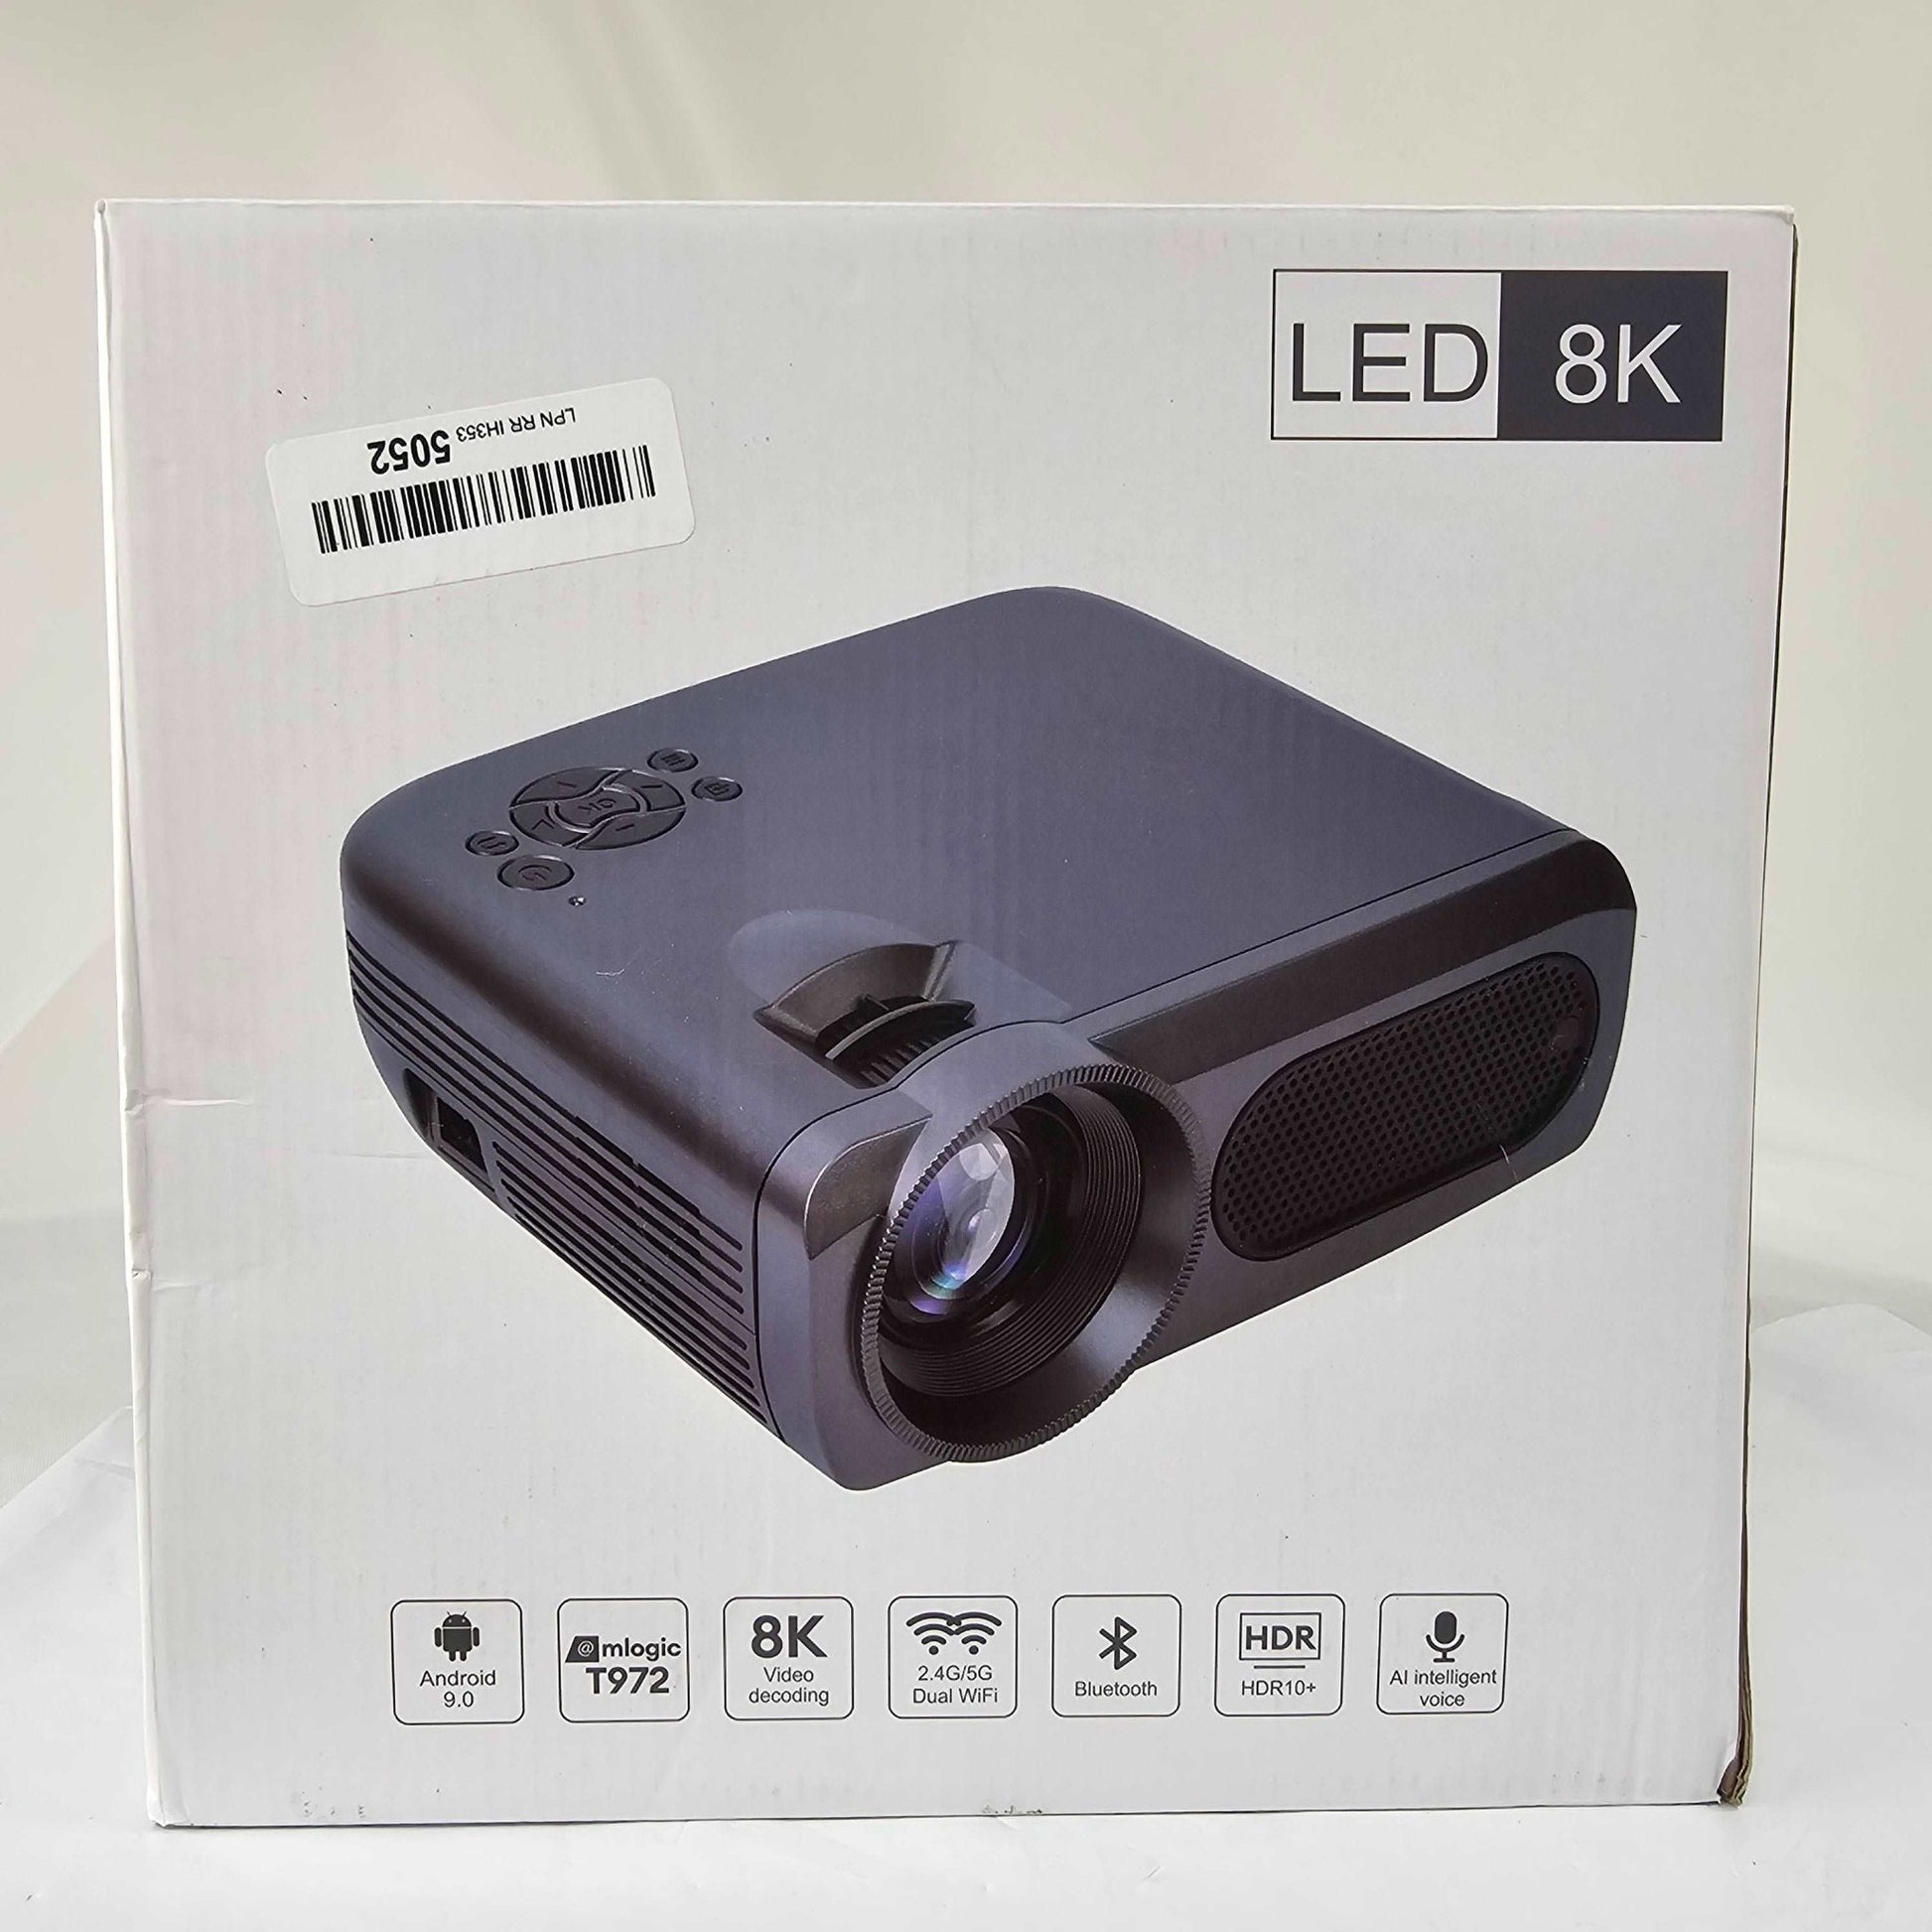 Outdoor LED 8K Movie Projector Bundle - Android 9.0, Dual WiFi, HDR10+, AI Voice Control - DQ Distribution